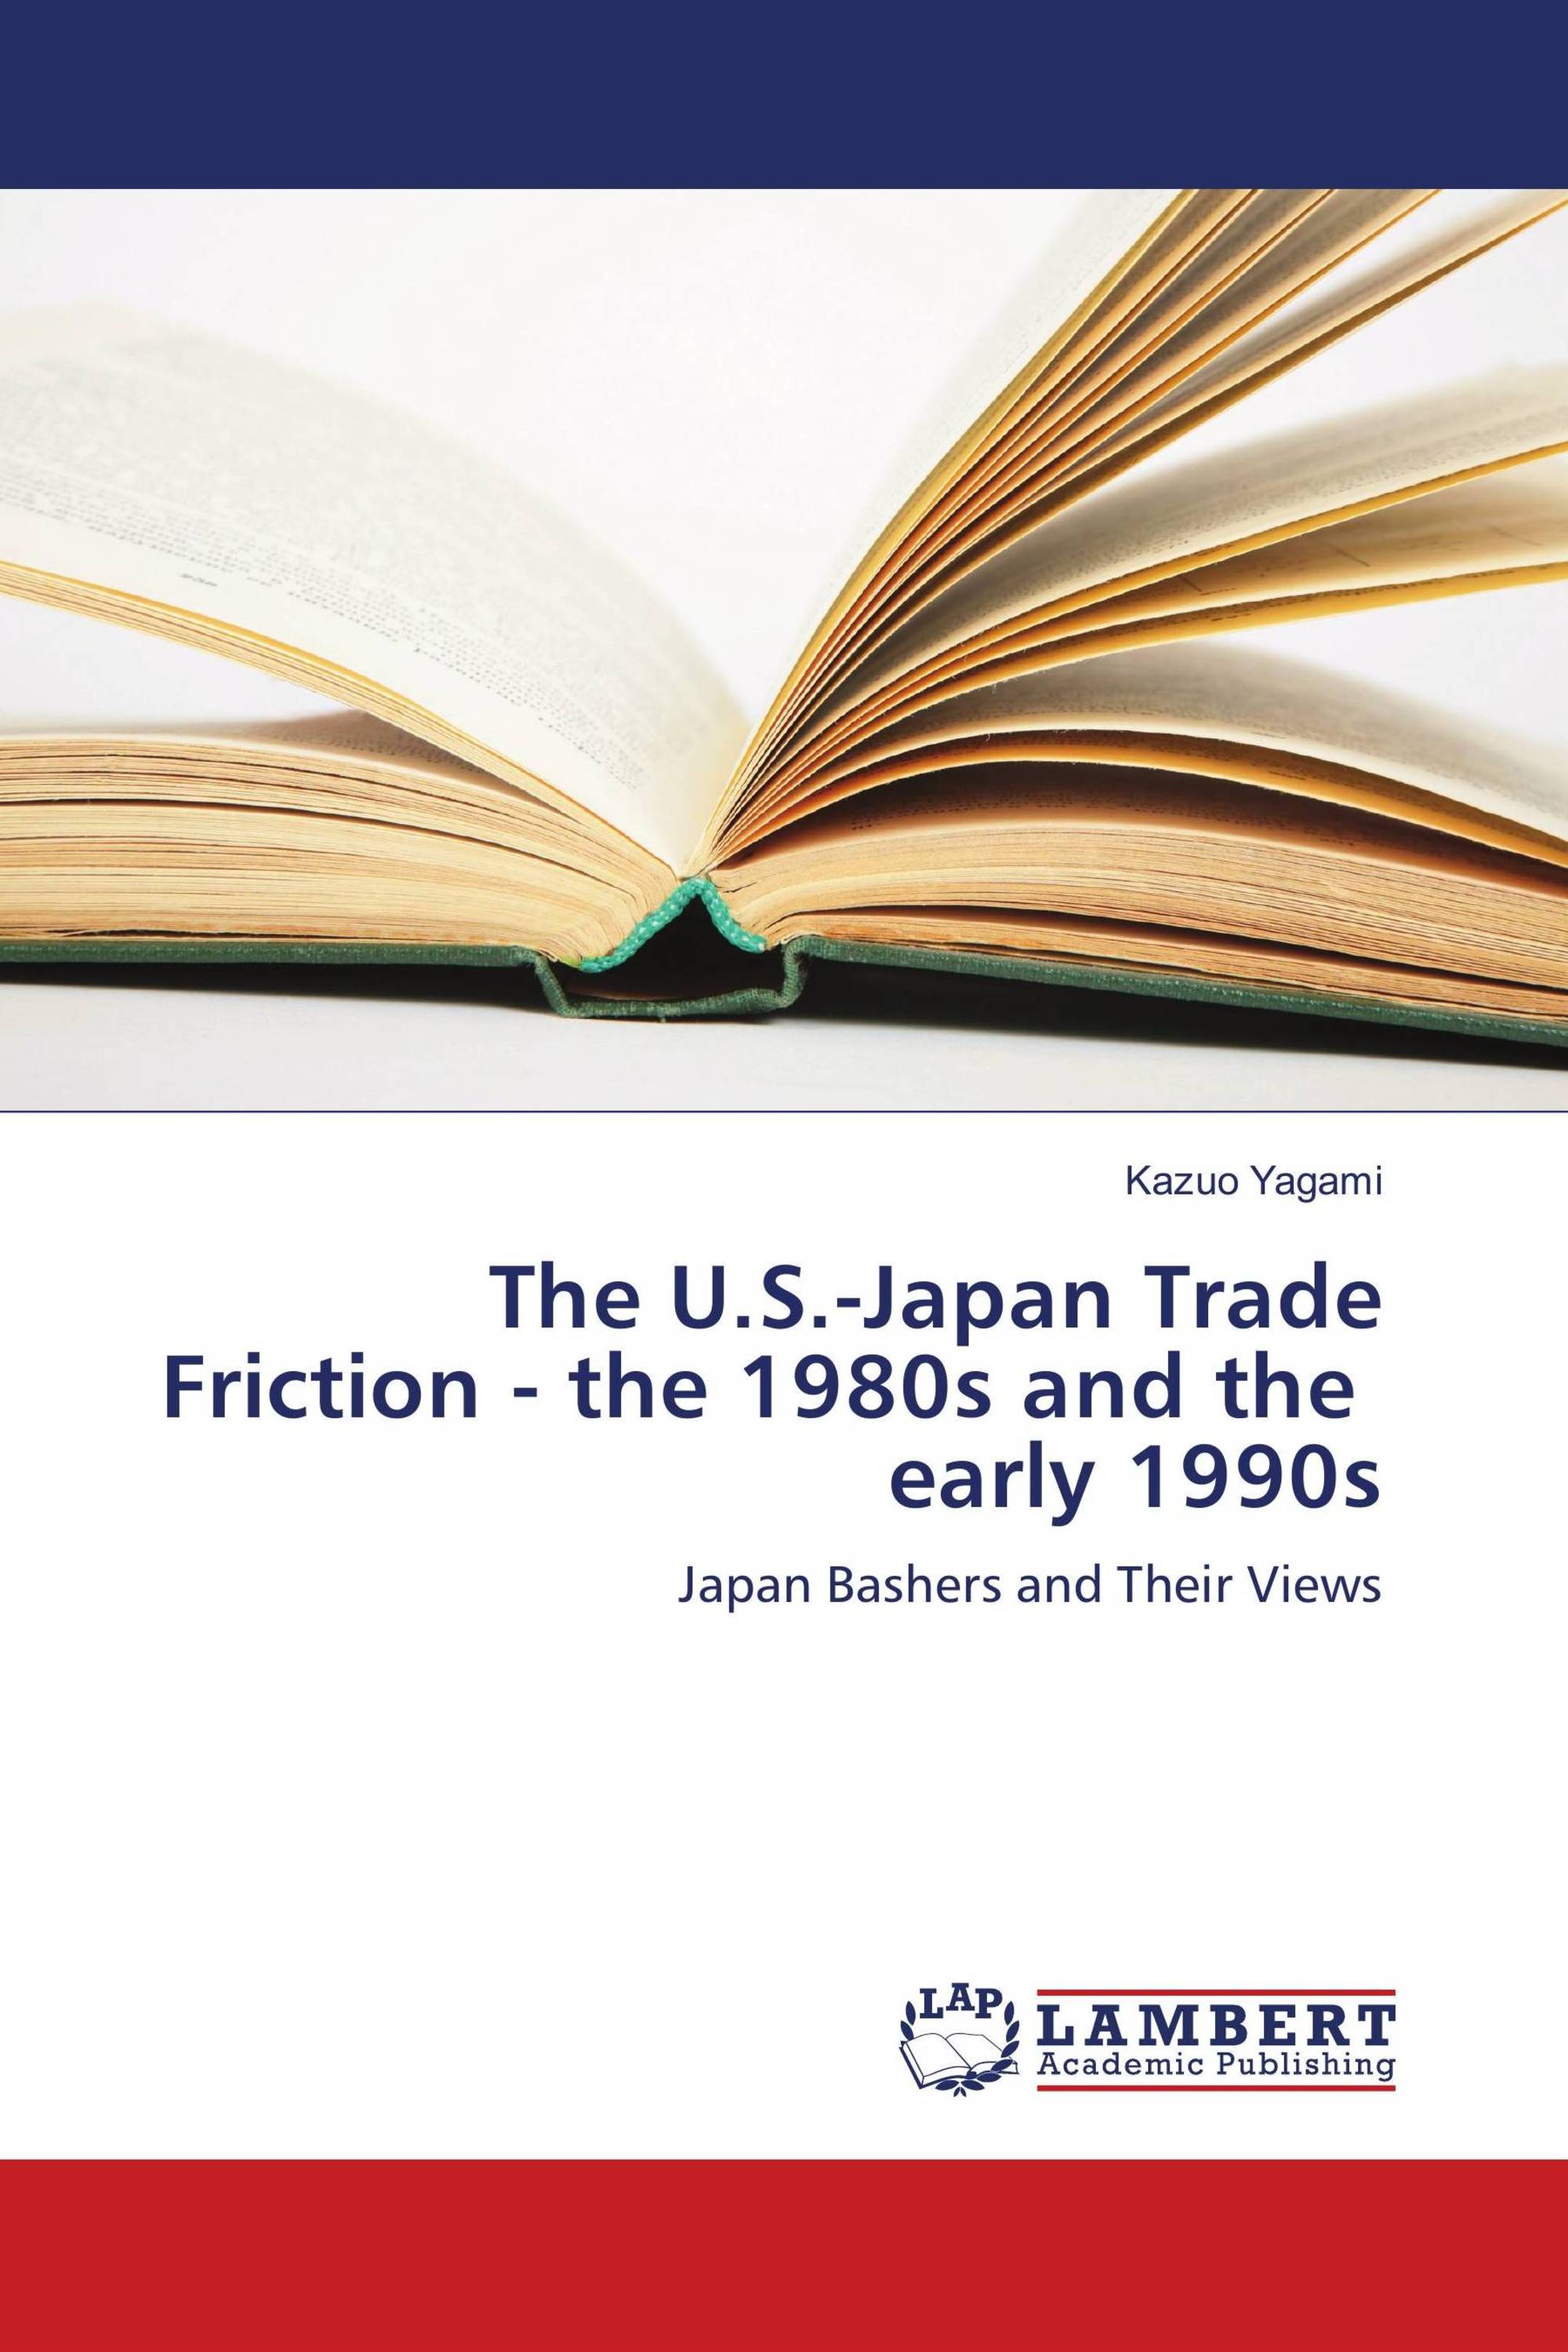 The U.S.-Japan Trade Friction - the 1980s and the early 1990s